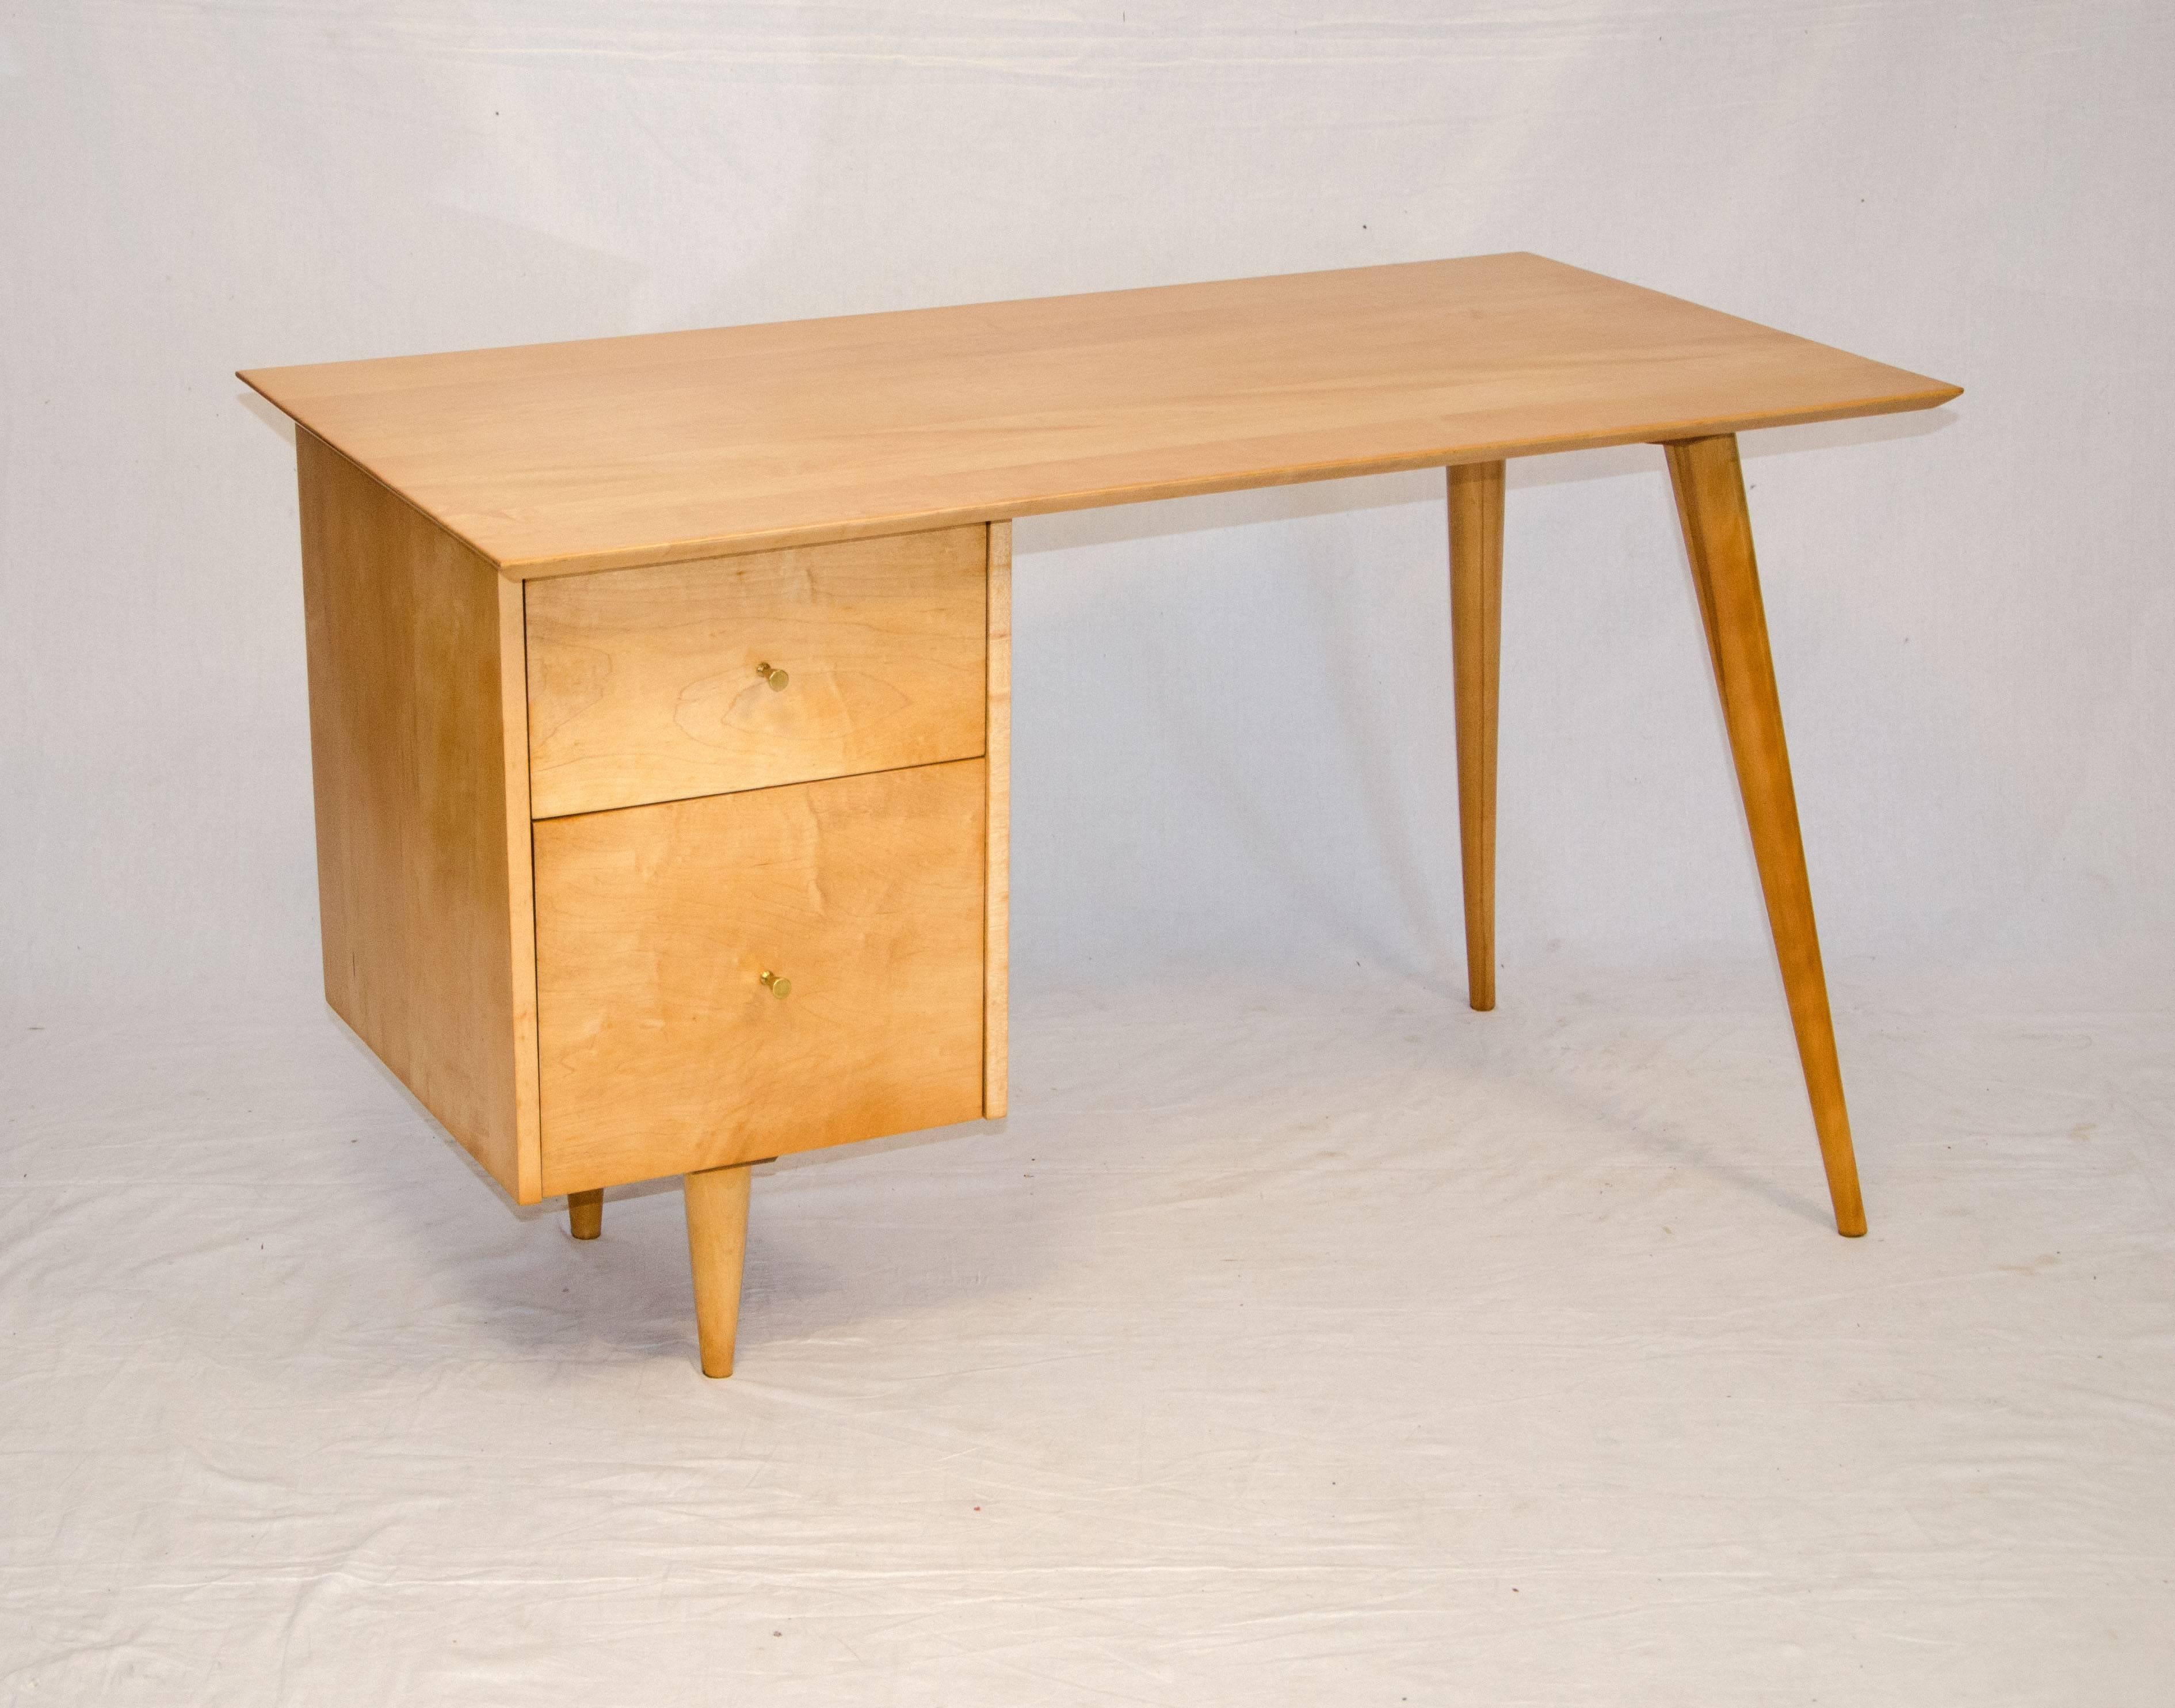 Solid maple medium size desk supported by drawers on one side and the signature angular tapered legs on the other. There is ample knee space without a center drawer. The top drawer retains most of the Planner Group label, bottom drawer is for